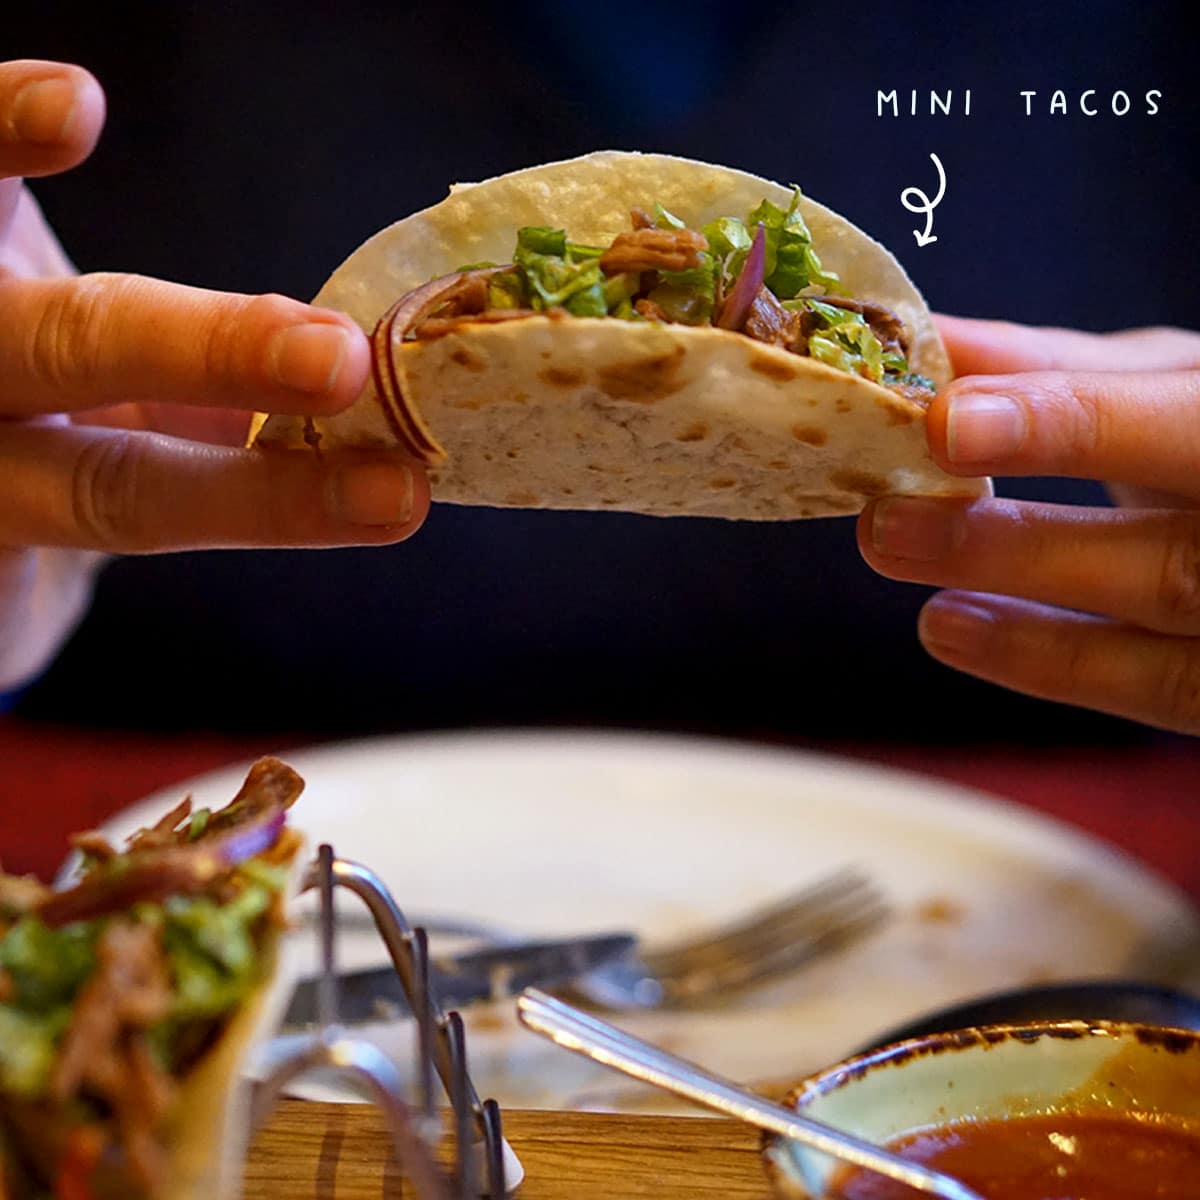 A single mini taco usually has around 70 calories, making them a great option for those watching their weight.